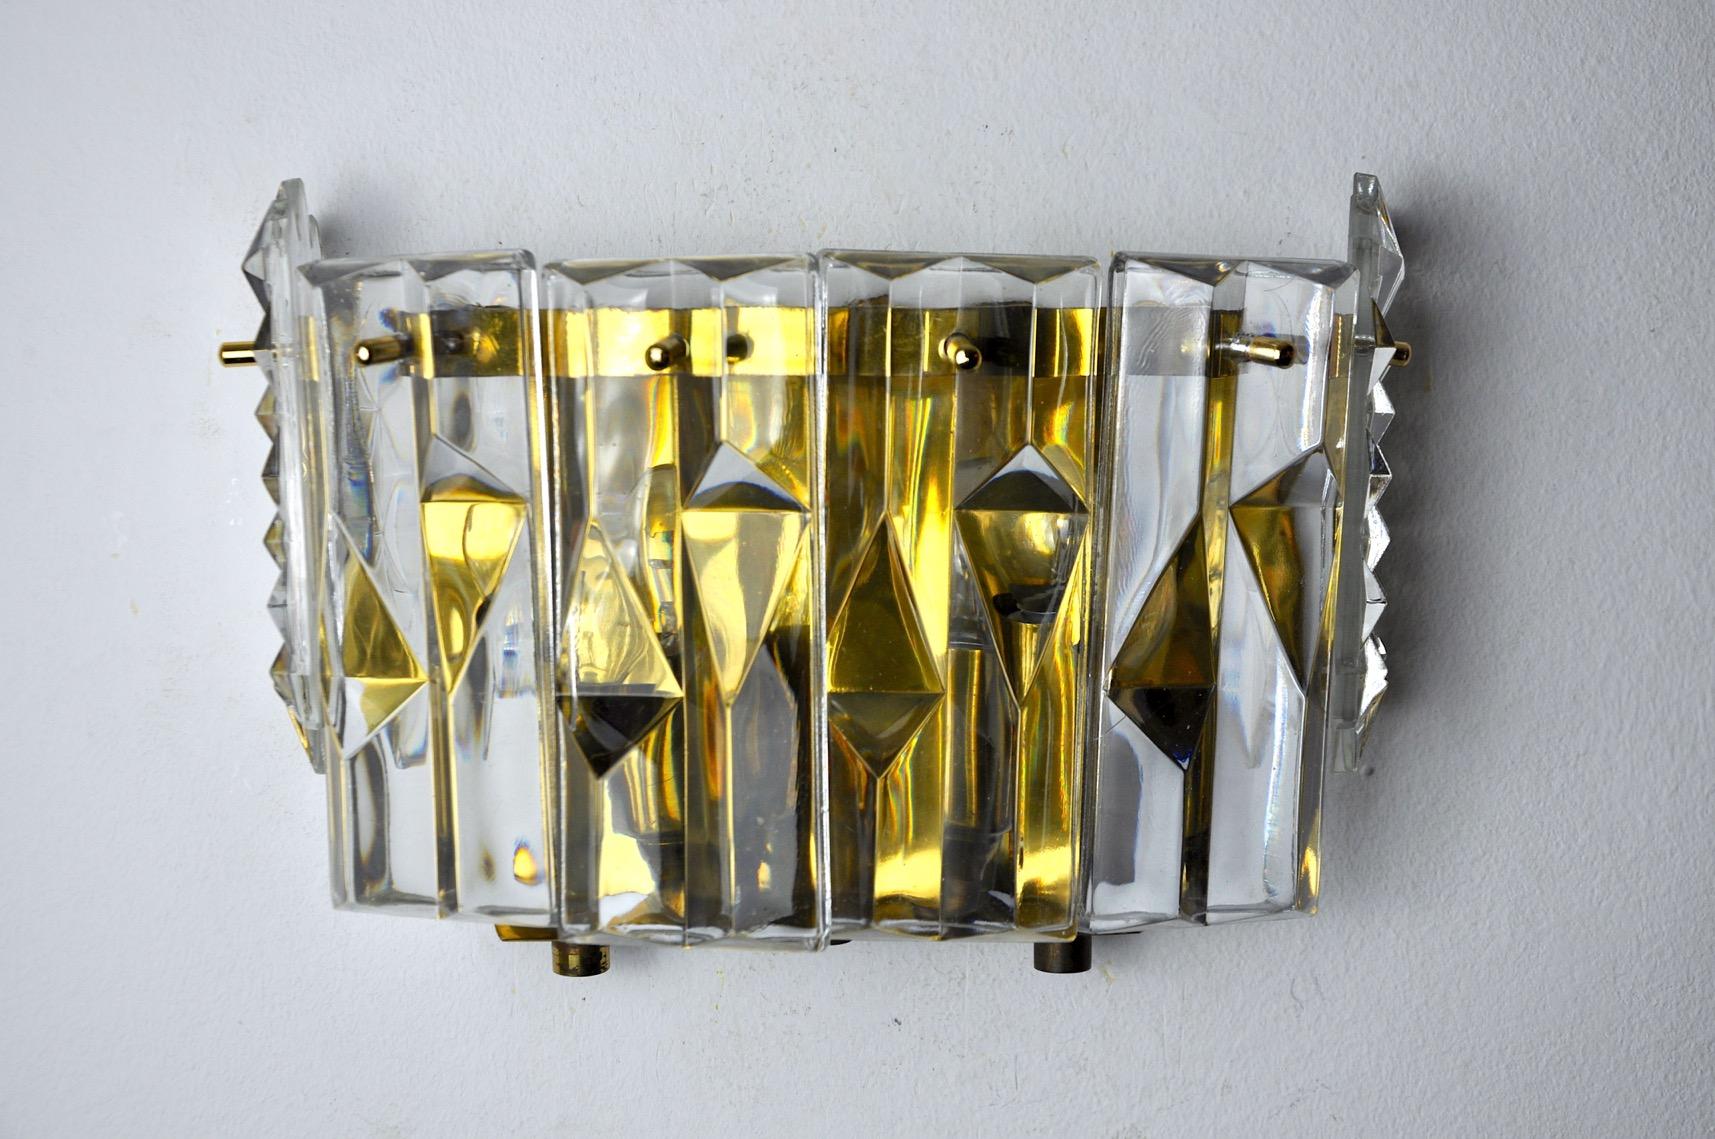 Superb and atypical kinkeldey wall lamp designated and produced in Germany in the 1970s. 6 crystals including a variation on 2 crystals, cut and distributed on a golden metal structure. Very beautiful design object that will illuminate your interior